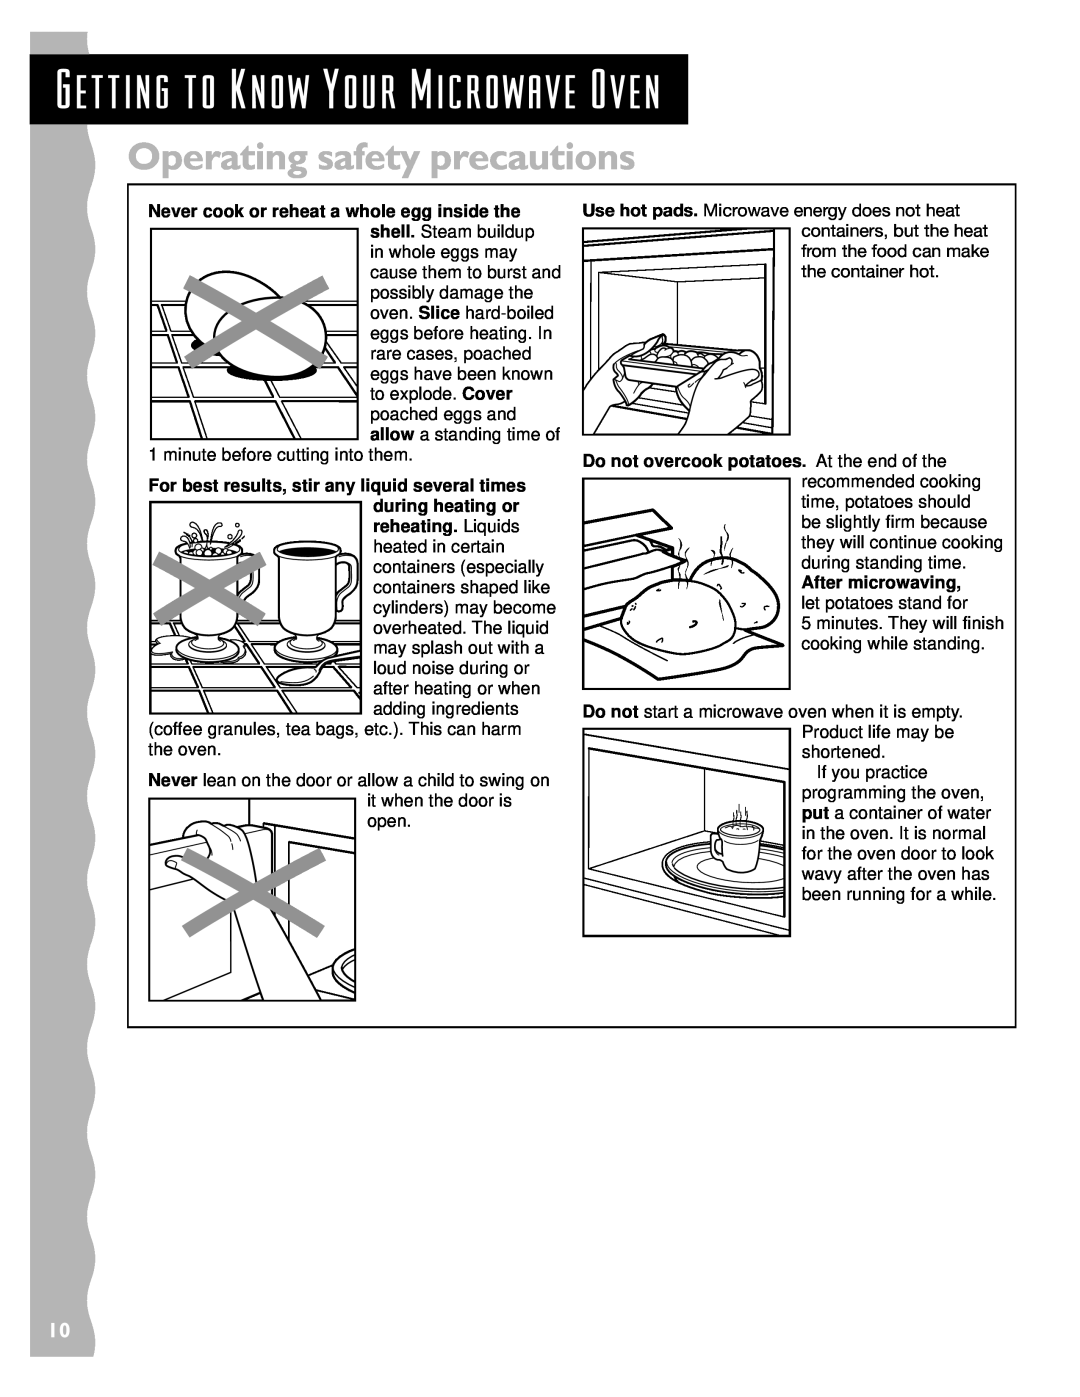 KitchenAid KCMS135H installation instructions Operating safety precautions, Getting to Know Your Microwave Oven 